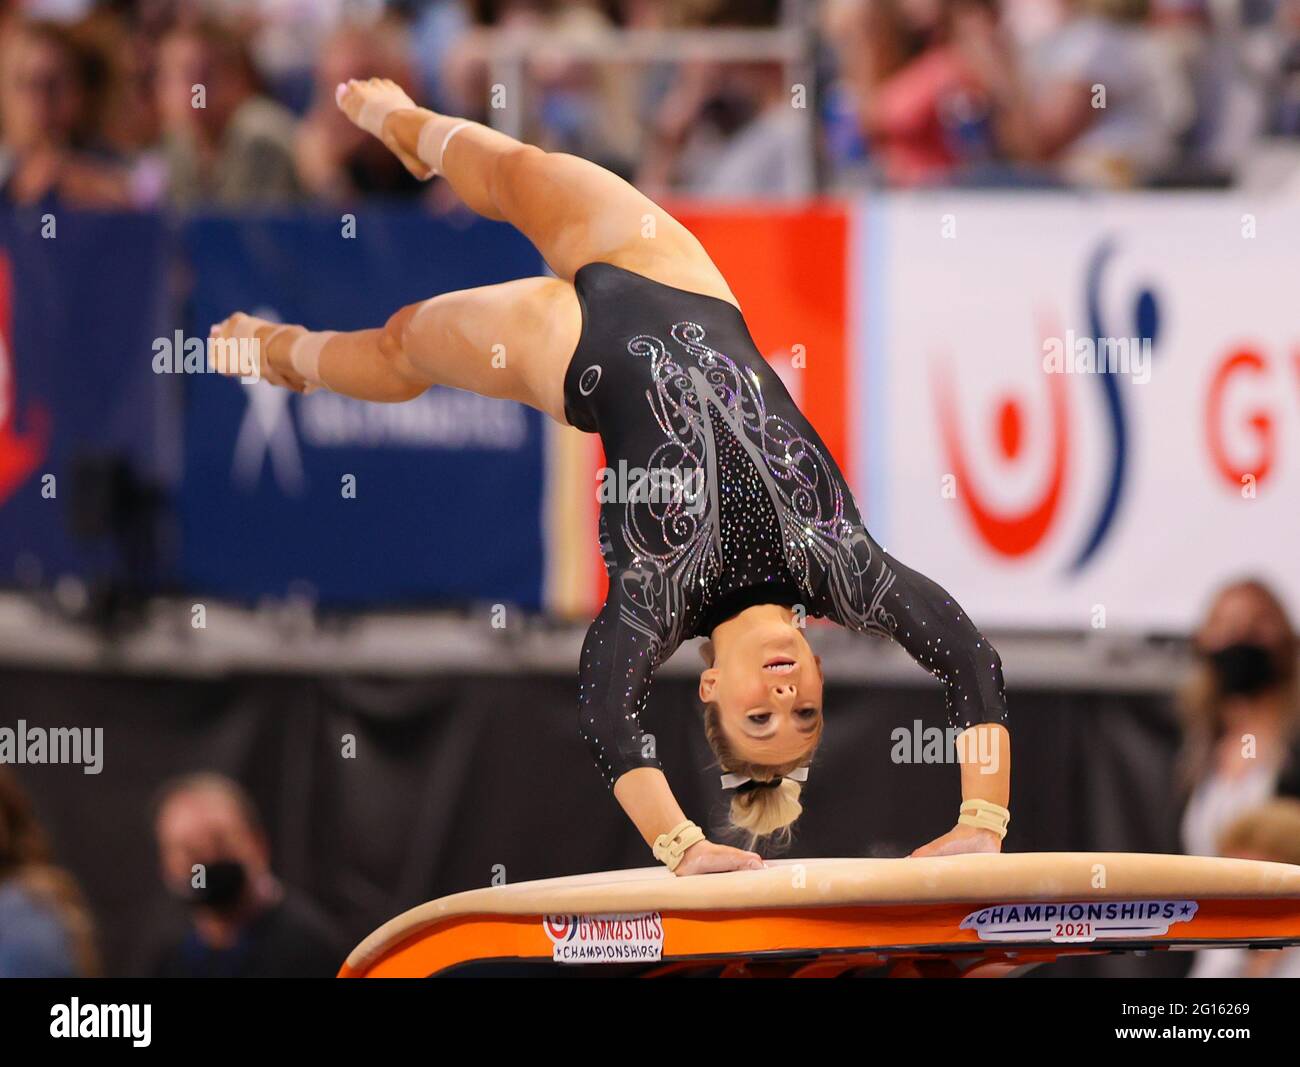 Texas, USA. 04th June, 2021. June 4, 2021: MyKayla Skinner performs one of her vaults during Day 1 of the 2021 U.S. Gymnastics Championships at Dickies Arena in Fort Worth, TX. Kyle Okita/CSM Credit: Cal Sport Media/Alamy Live News Stock Photo